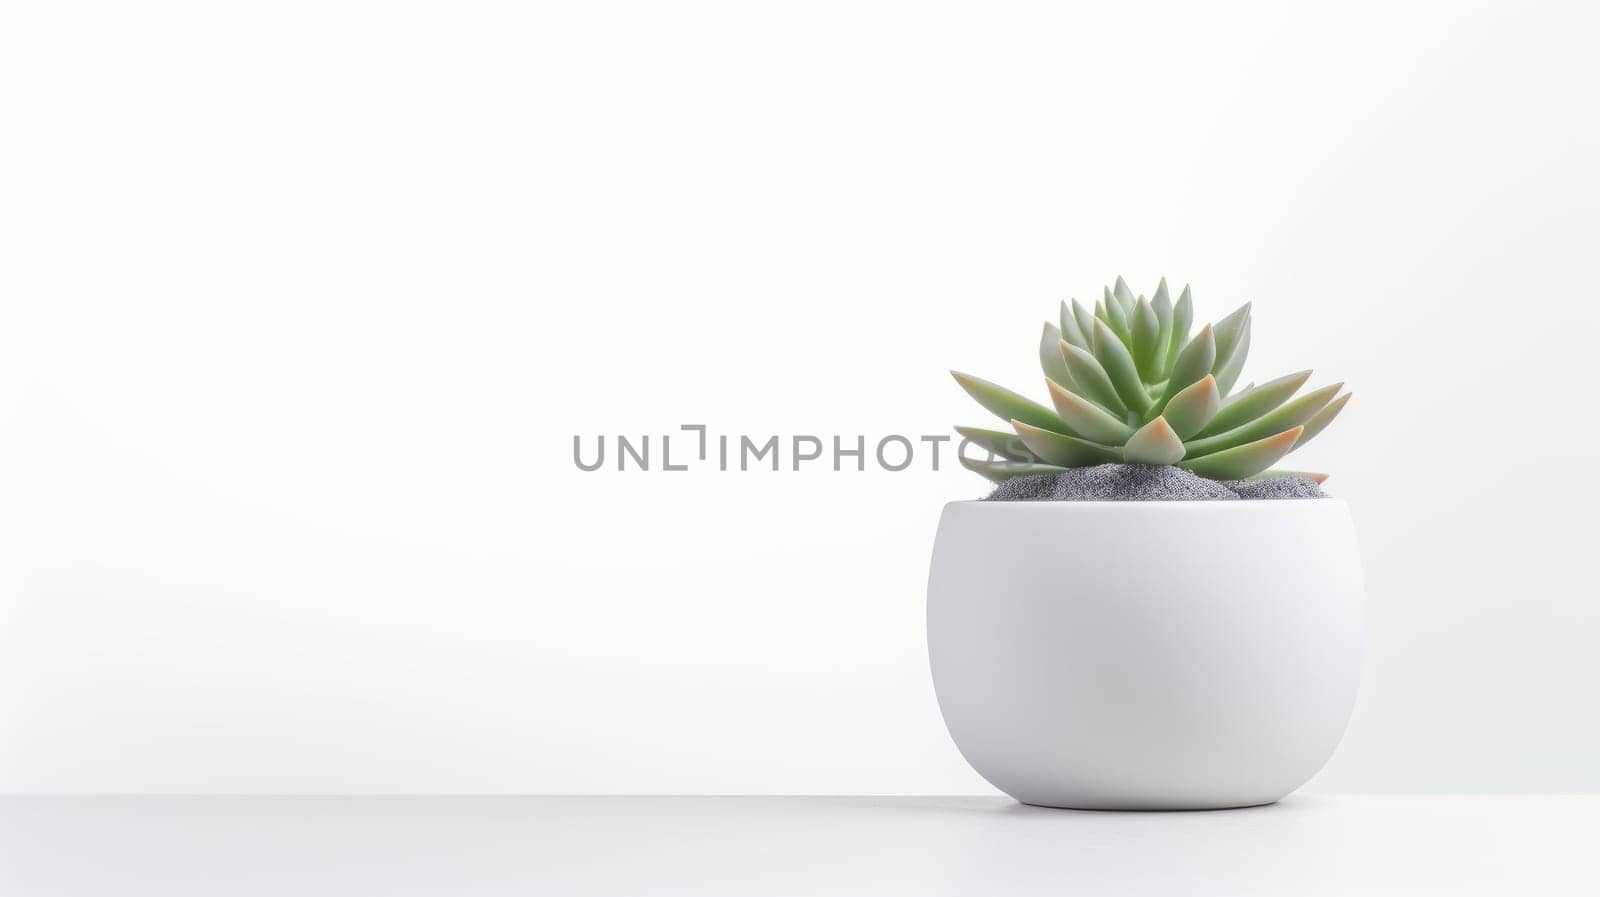 a succulent plant in a white ceramic pot, placed against a white background, conveying a sense of peace and tranquility. High quality photo